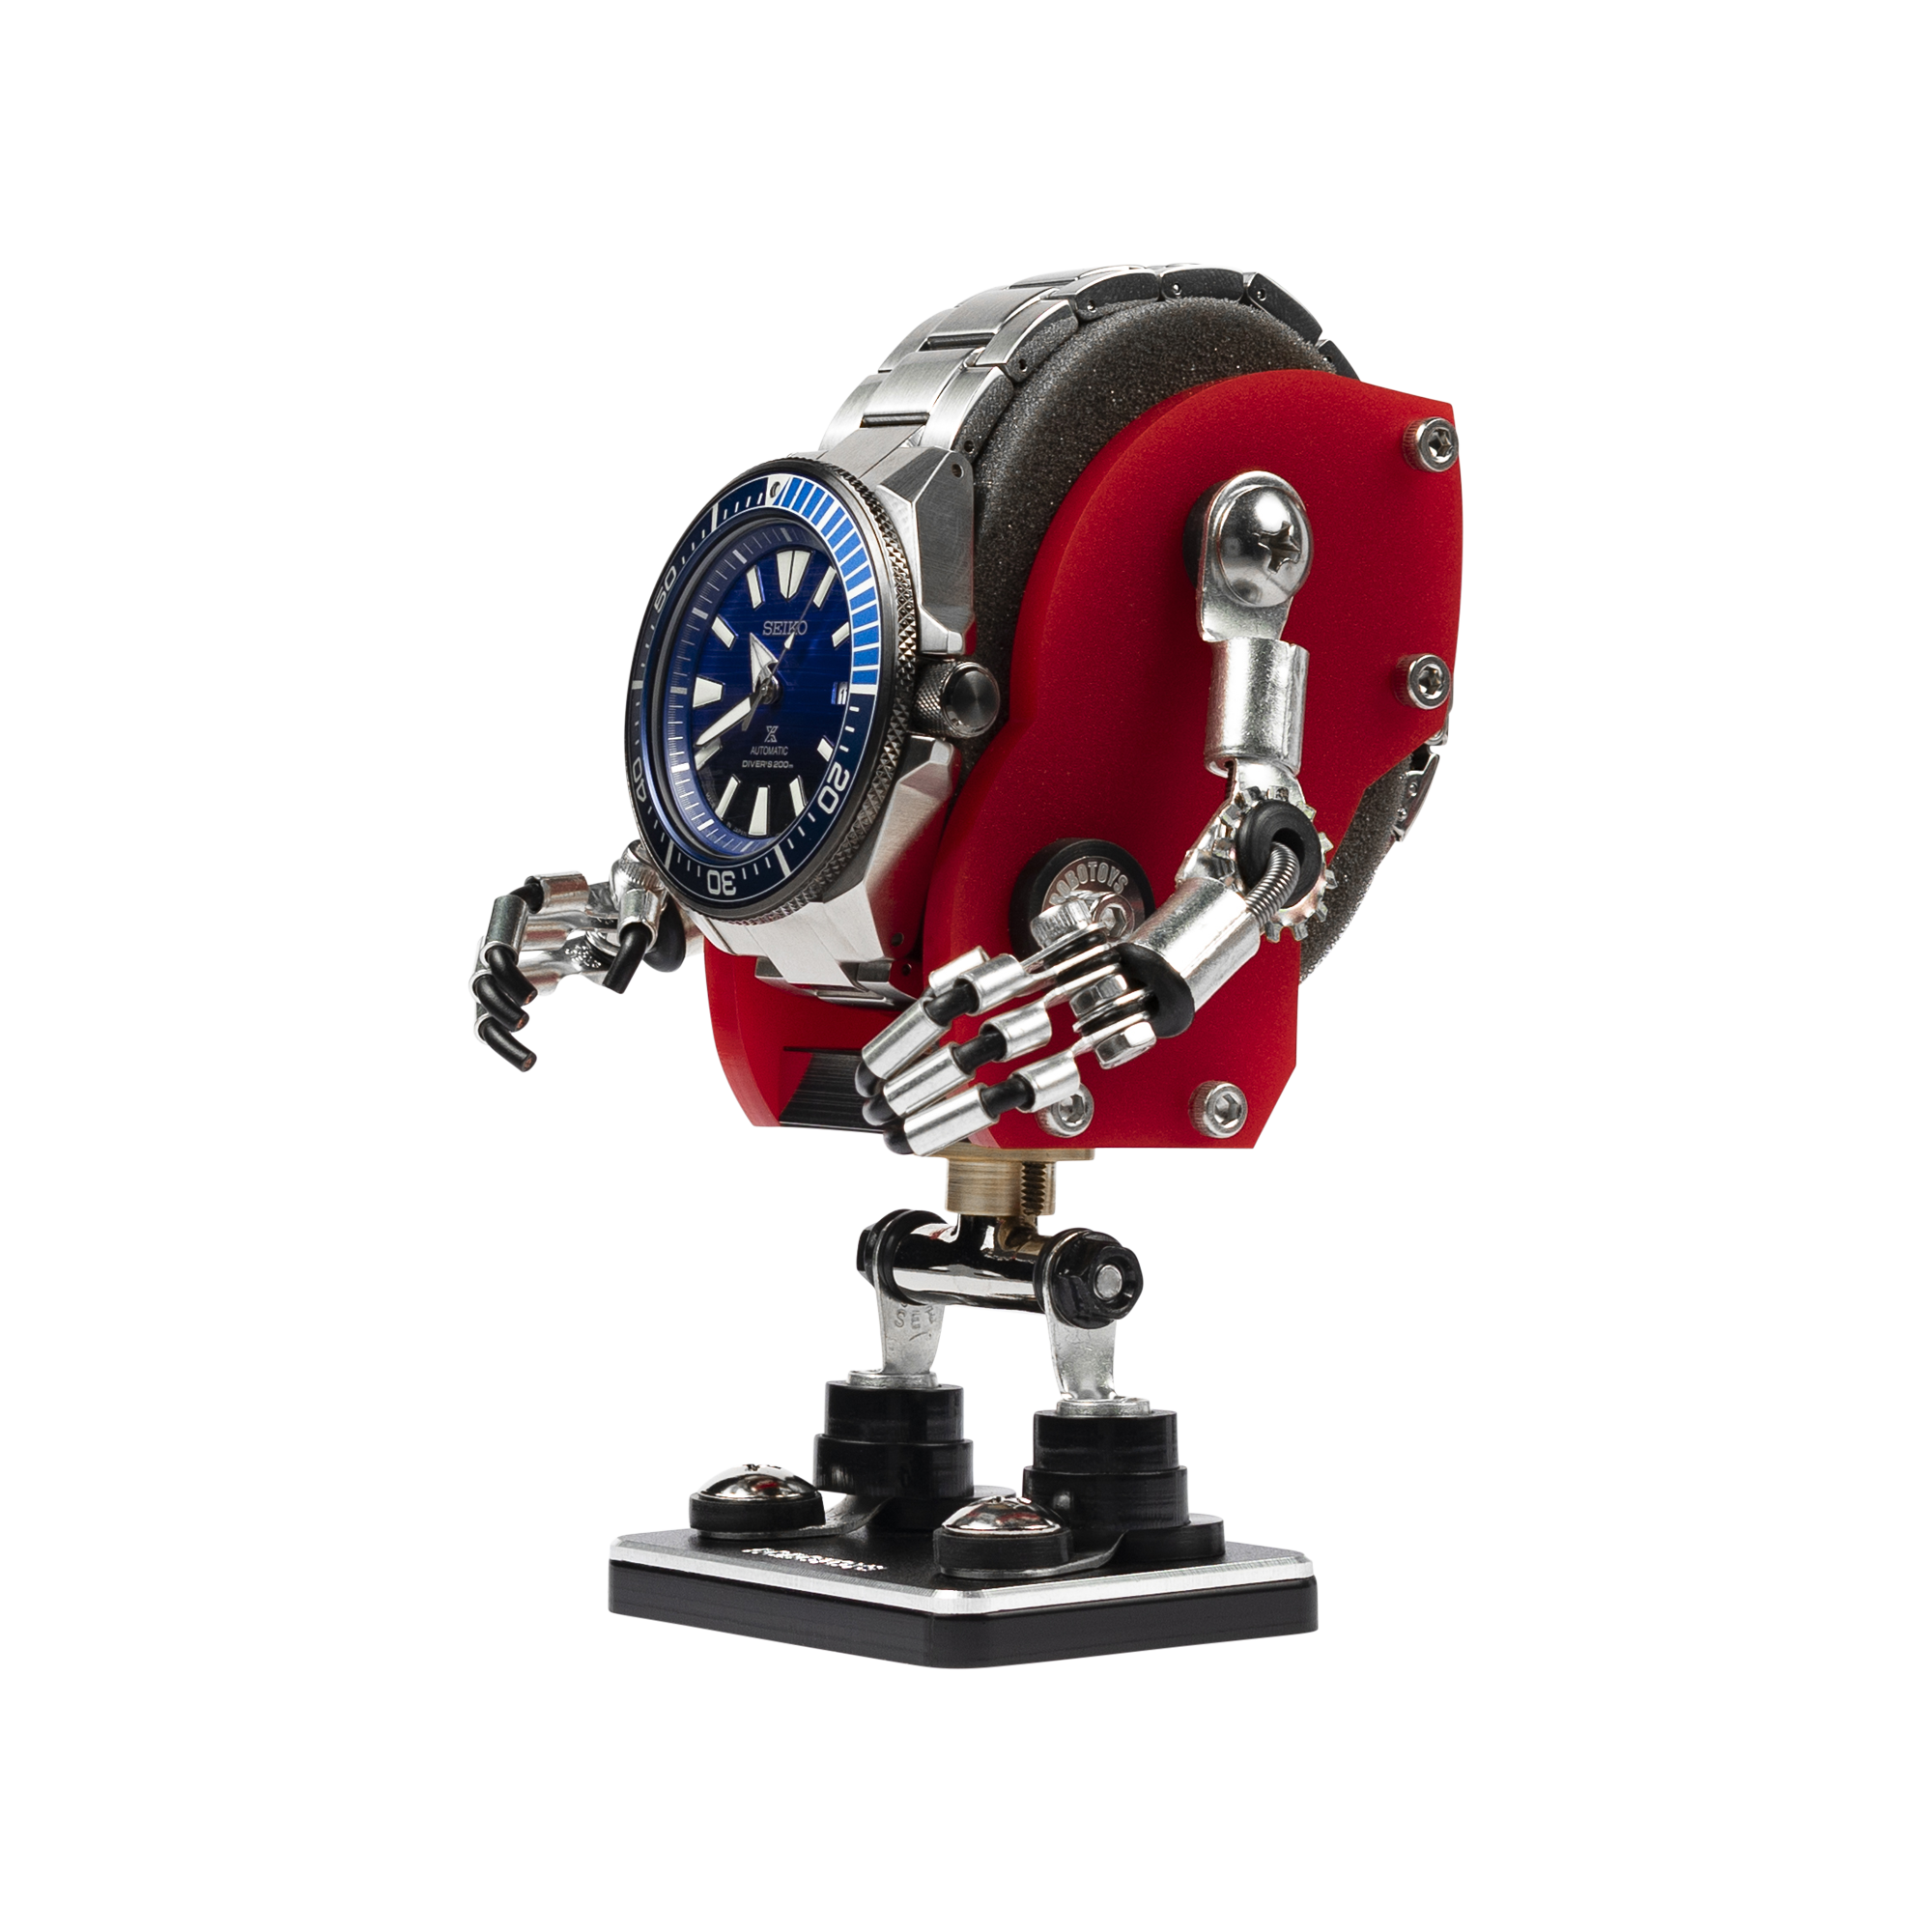 [RoboToys] Watch Stand - Minibot - Red